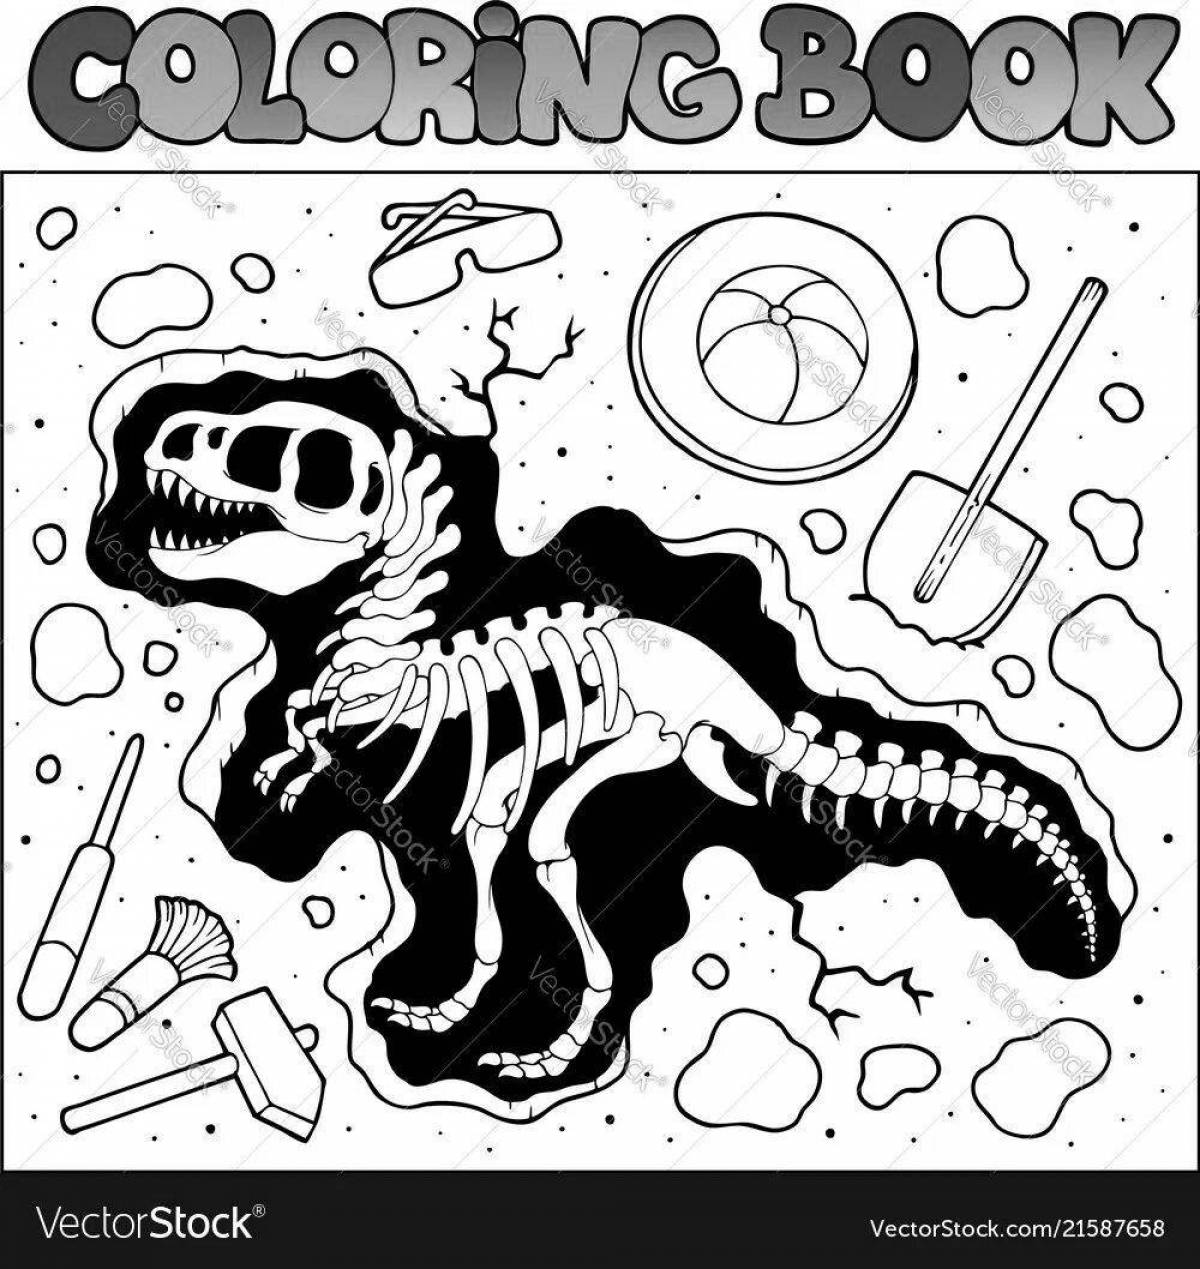 Coloring book glamor archaeologist